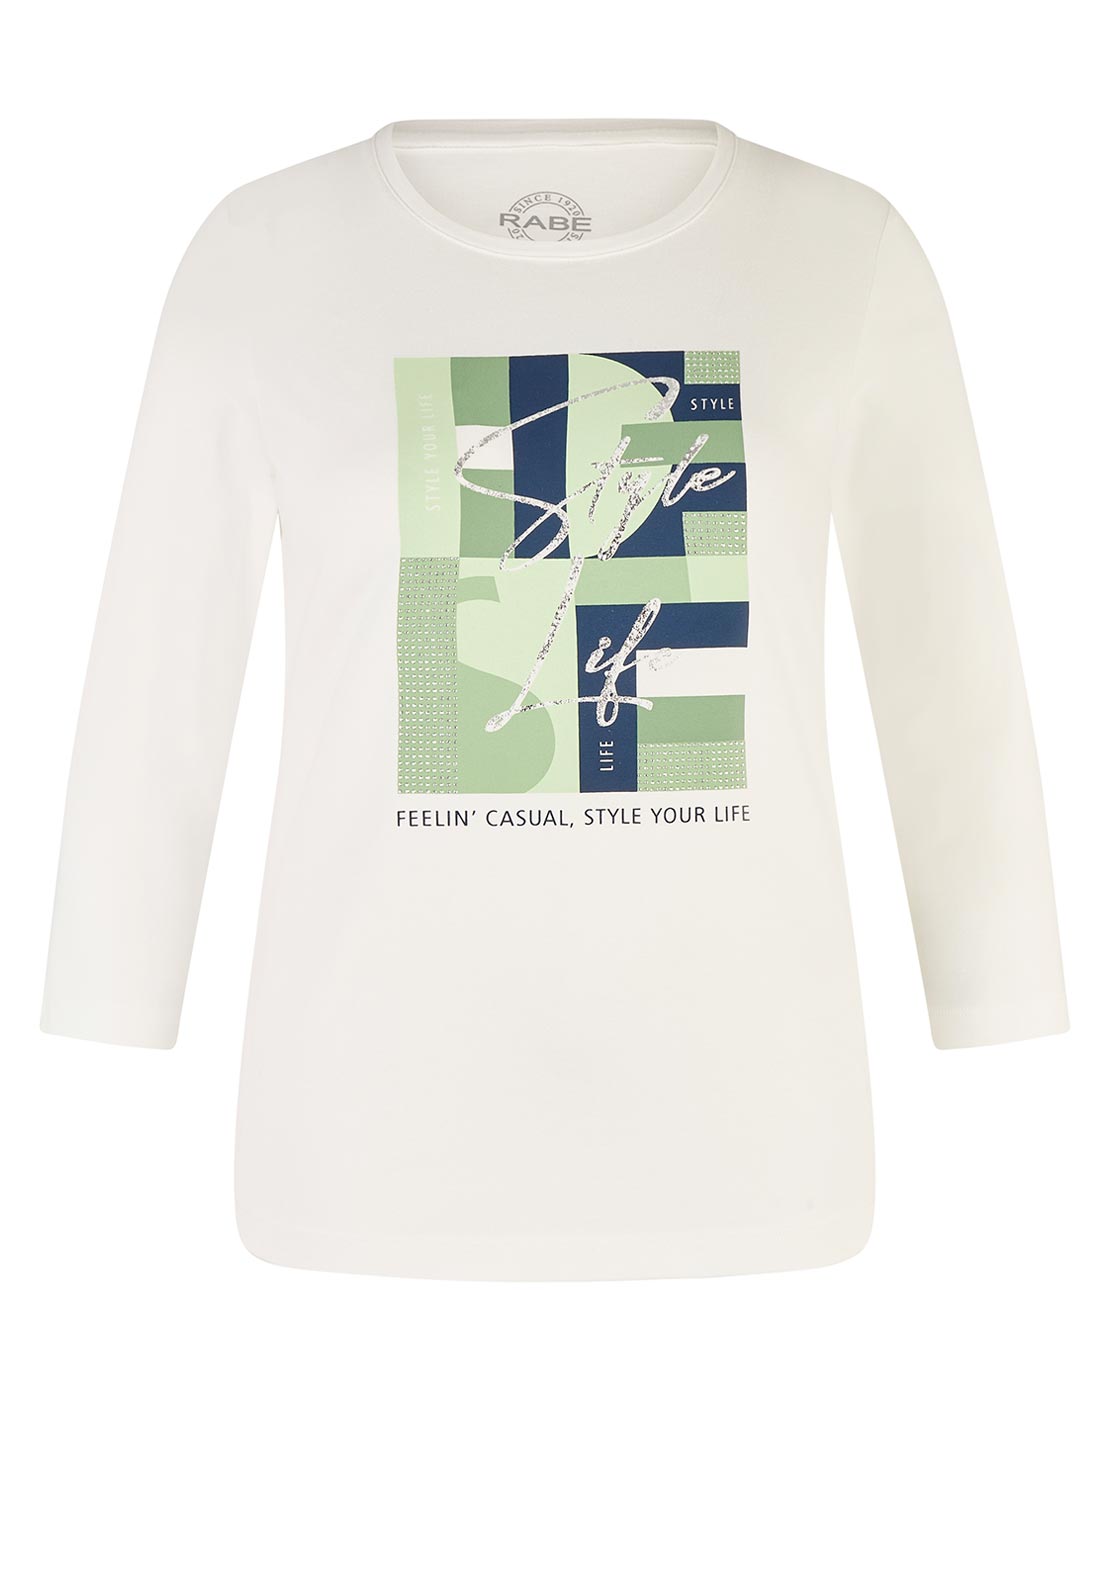 T-Shirt, Your Style Off Rabe White McElhinneys Graphic Life -